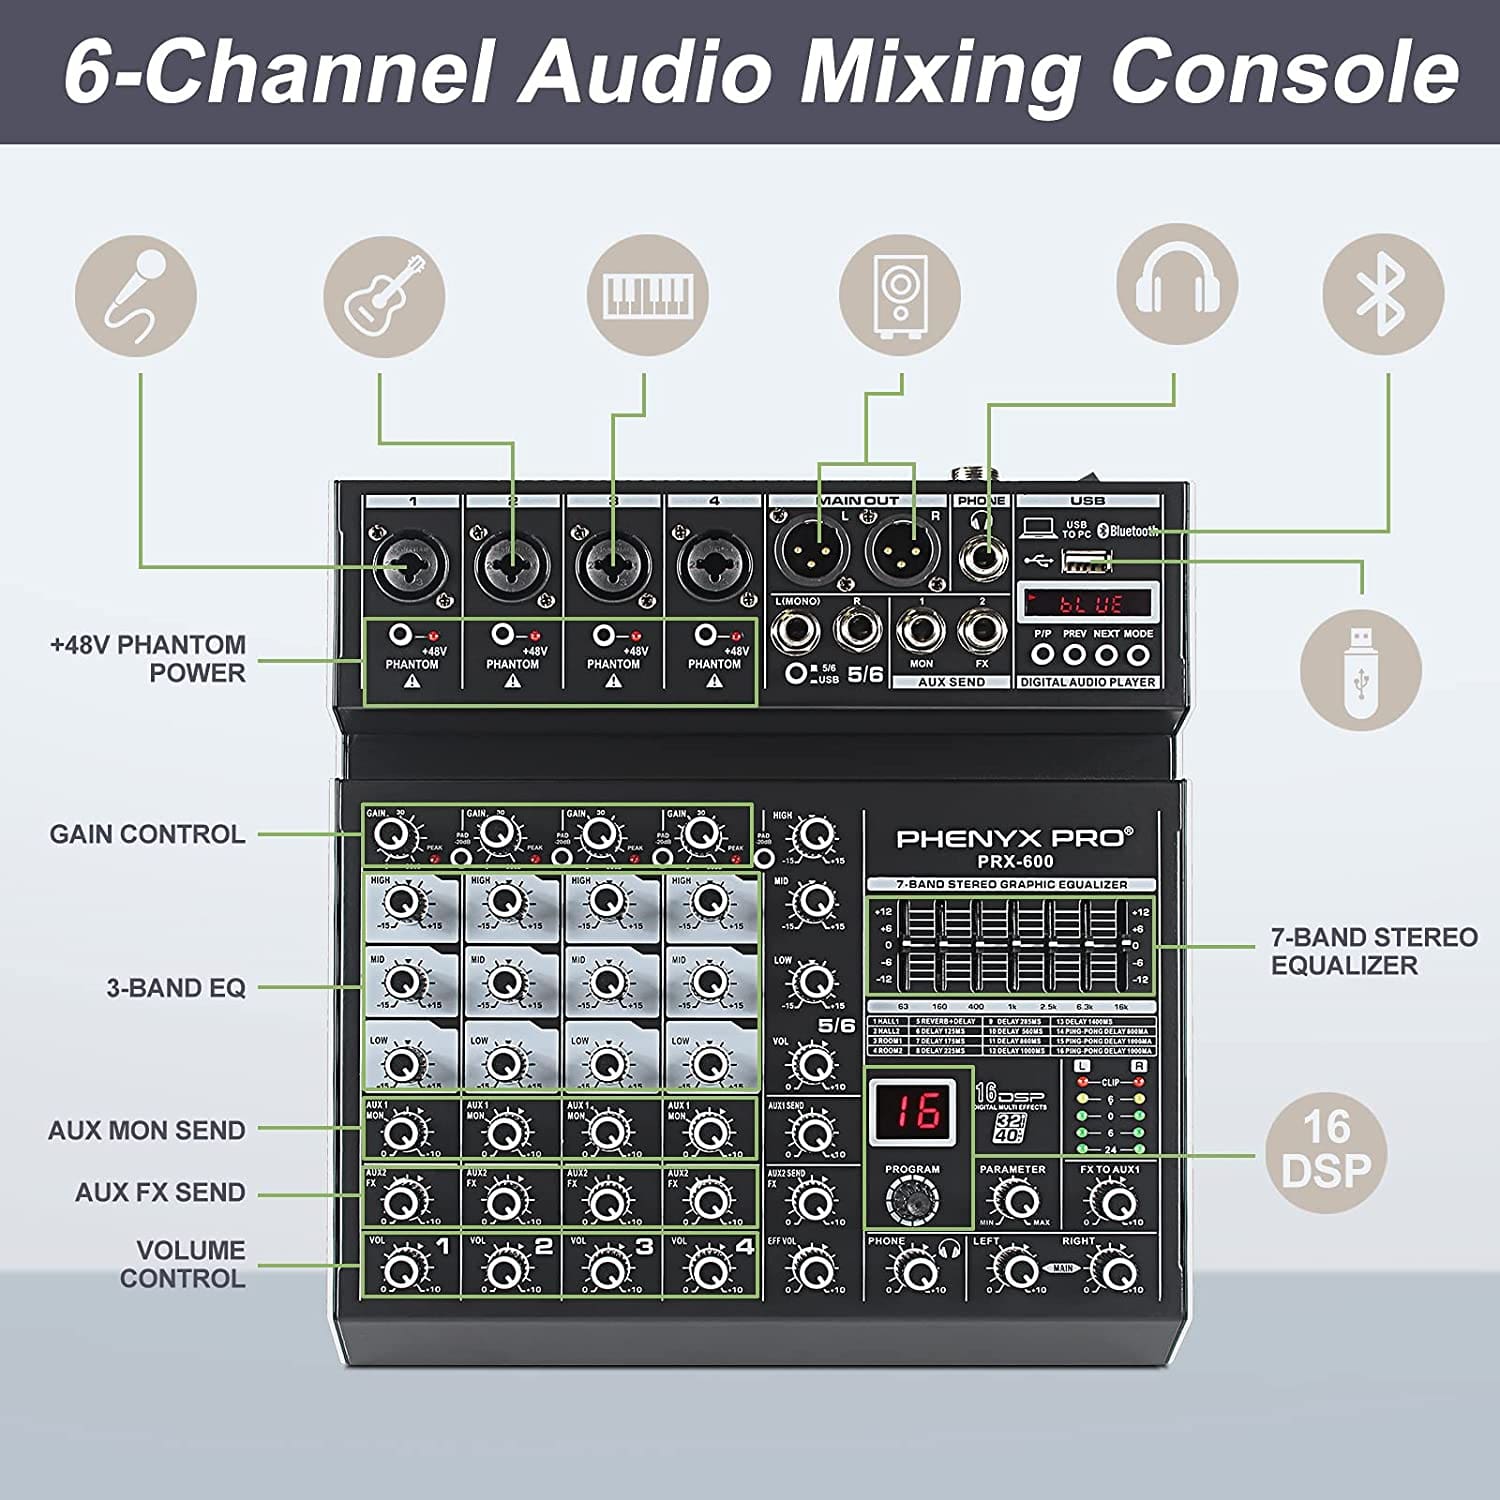 Phenyx Pro PRX-600 Audio Mixer, EQ section and DSP for professional Use